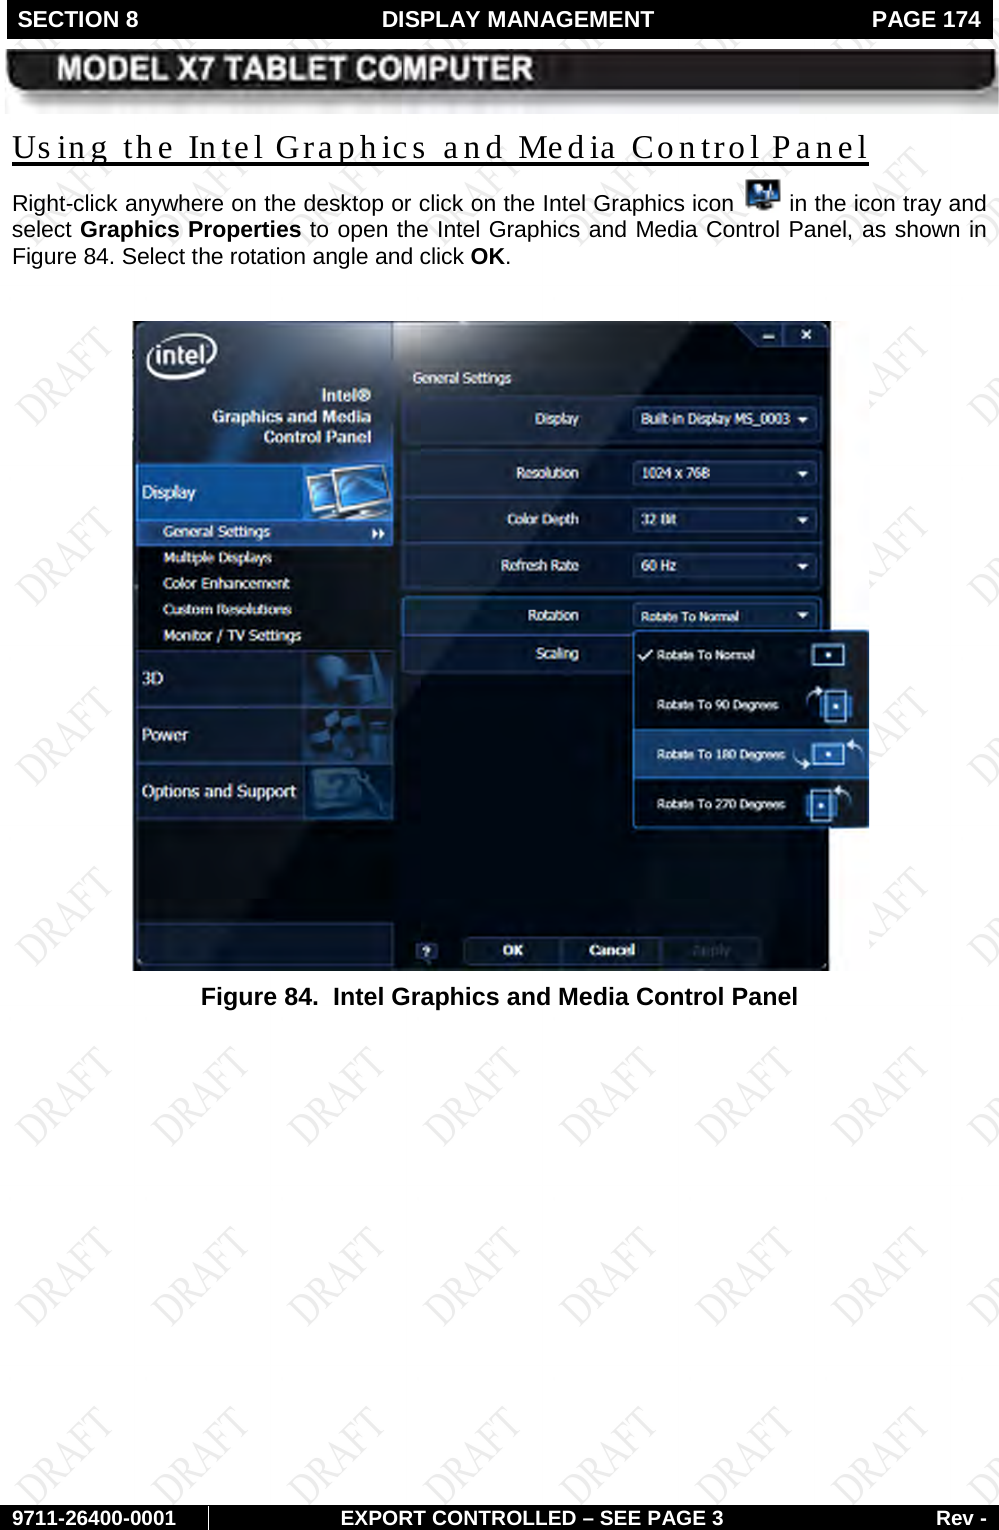 SECTION 8  DISPLAY MANAGEMENT  PAGE 174        9711-26400-0001 EXPORT CONTROLLED – SEE PAGE 3 Rev - Right-click anywhere on the desktop or click on the Intel Graphics icon   in the icon tray and select Graphics Properties to open the Intel Graphics and Media Control Panel, as shown in Us ing the Intel Graphics and Media Control Panel Figure 84. Select the rotation angle and click OK.   Figure 84.  Intel Graphics and Media Control Panel    